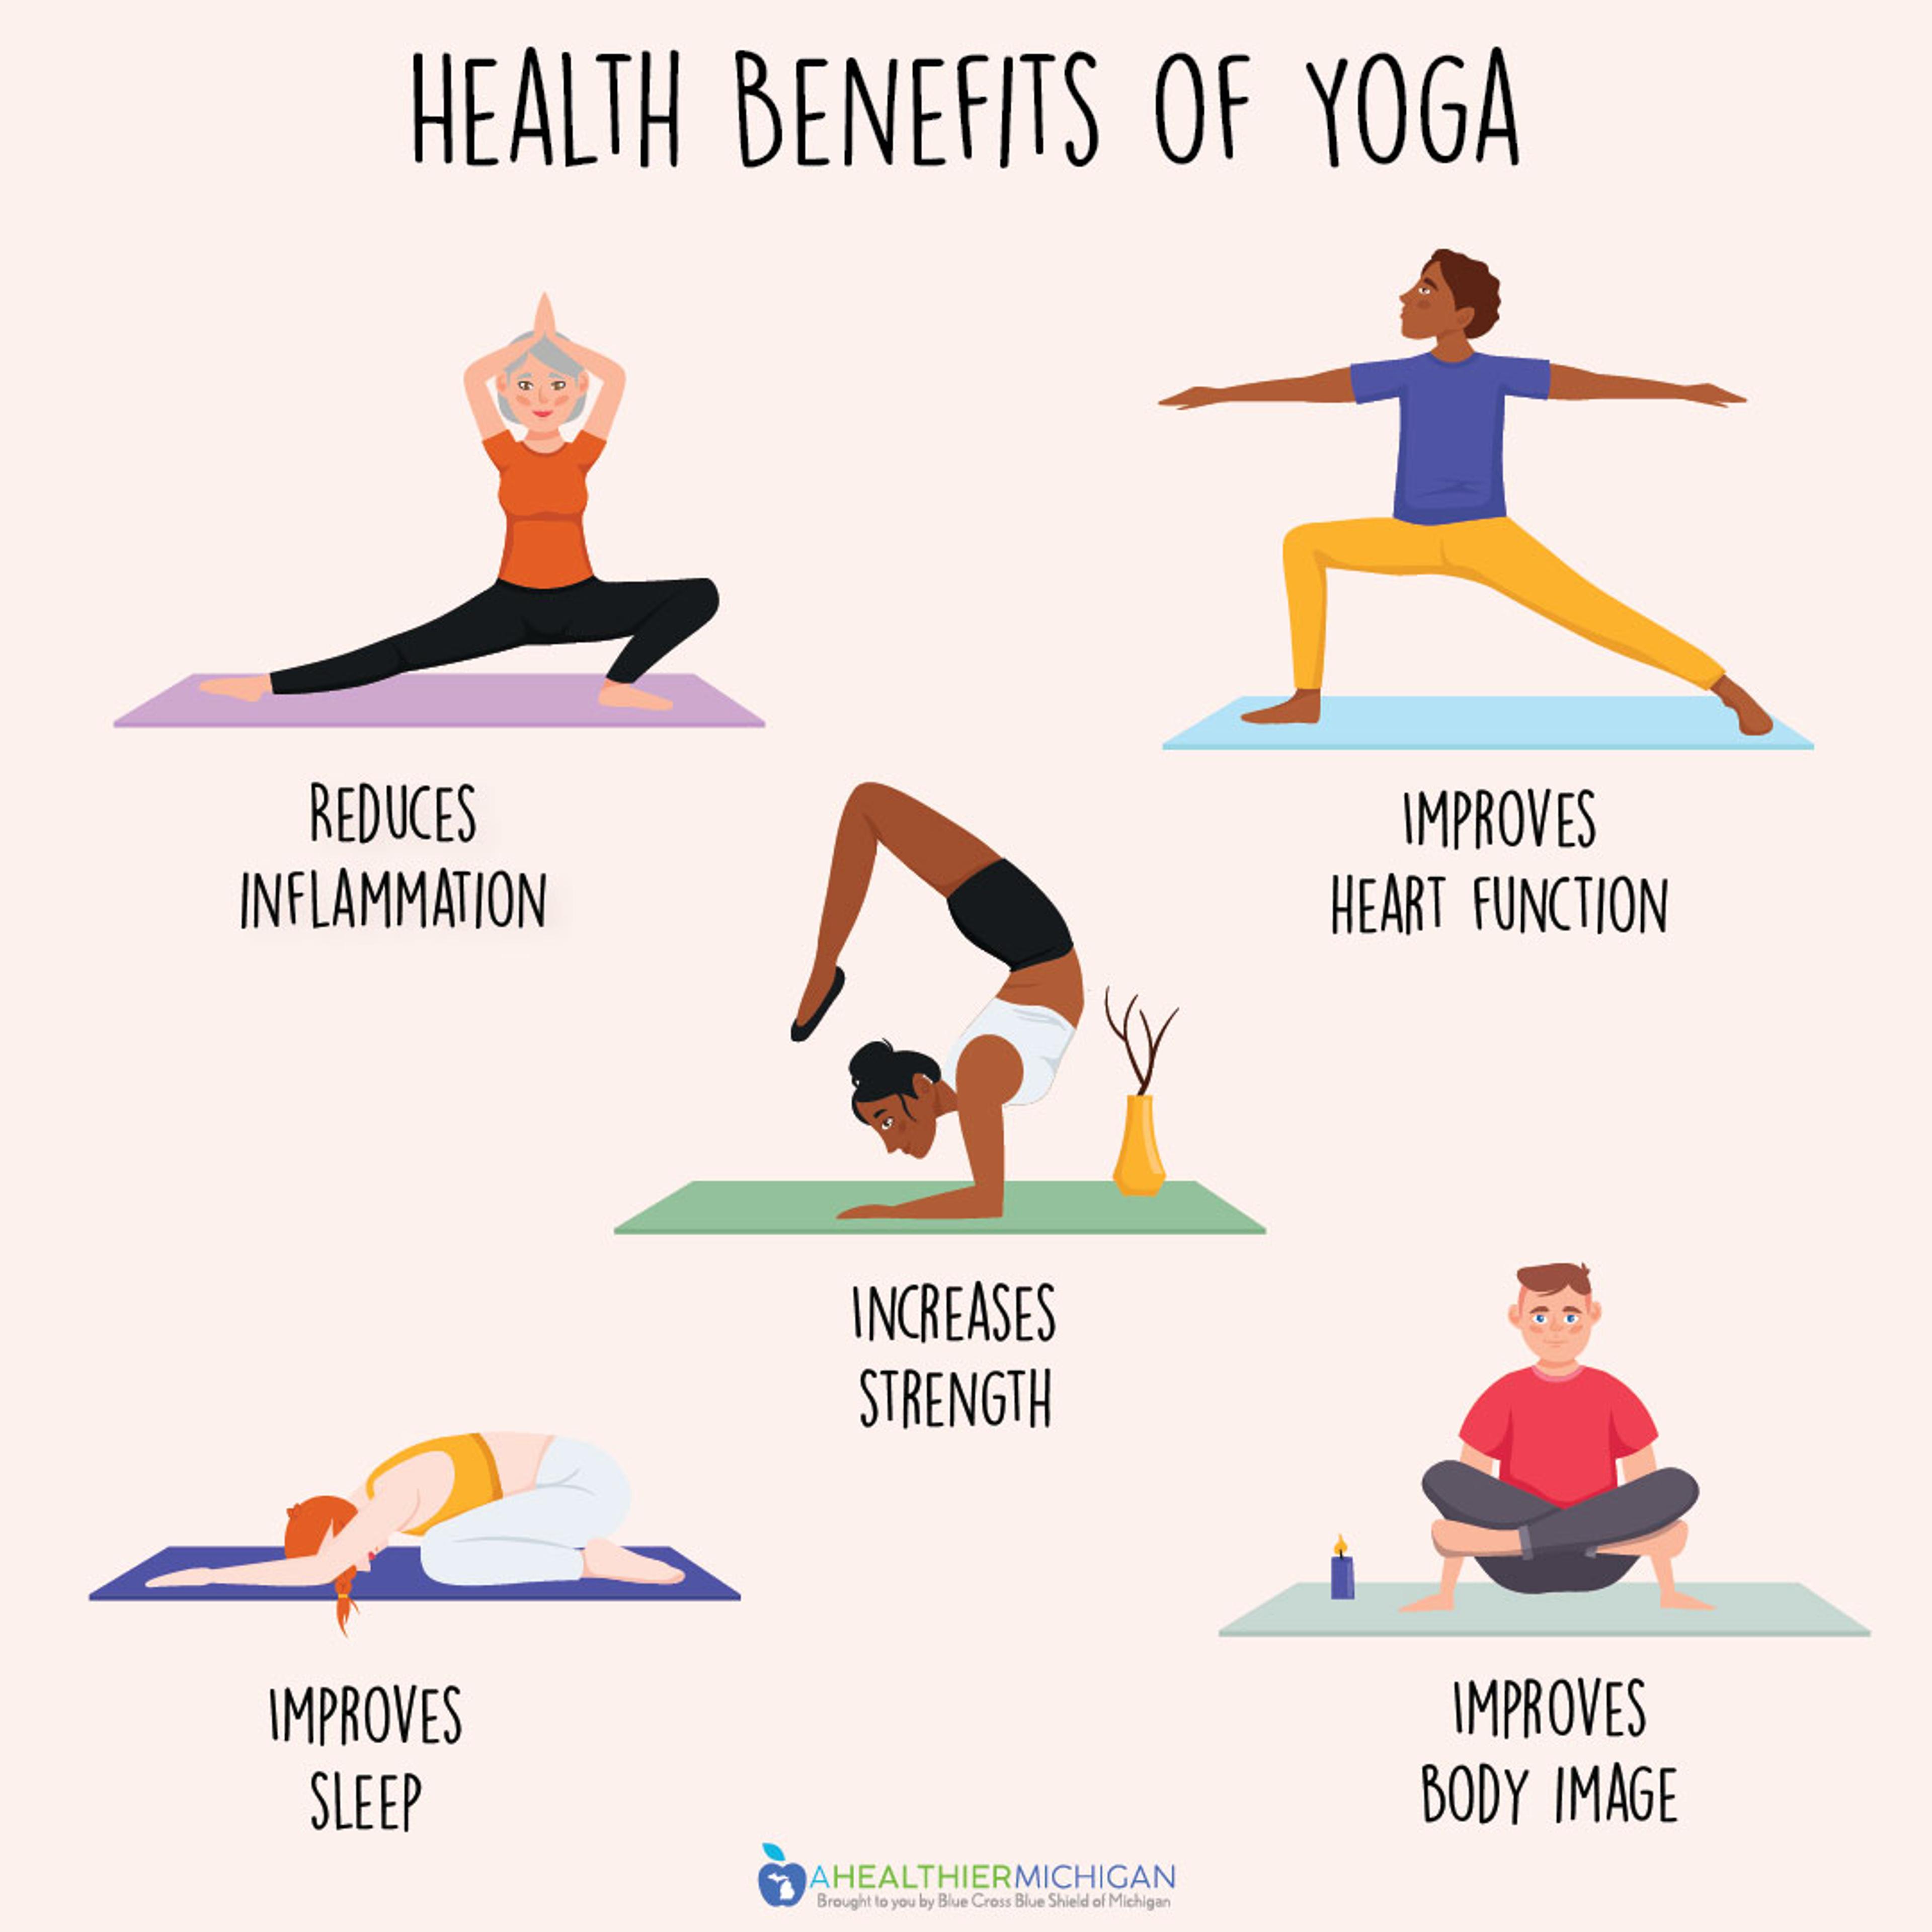 Yoga Practice for Better Health - Benefits of Yoga for Mental Well-being